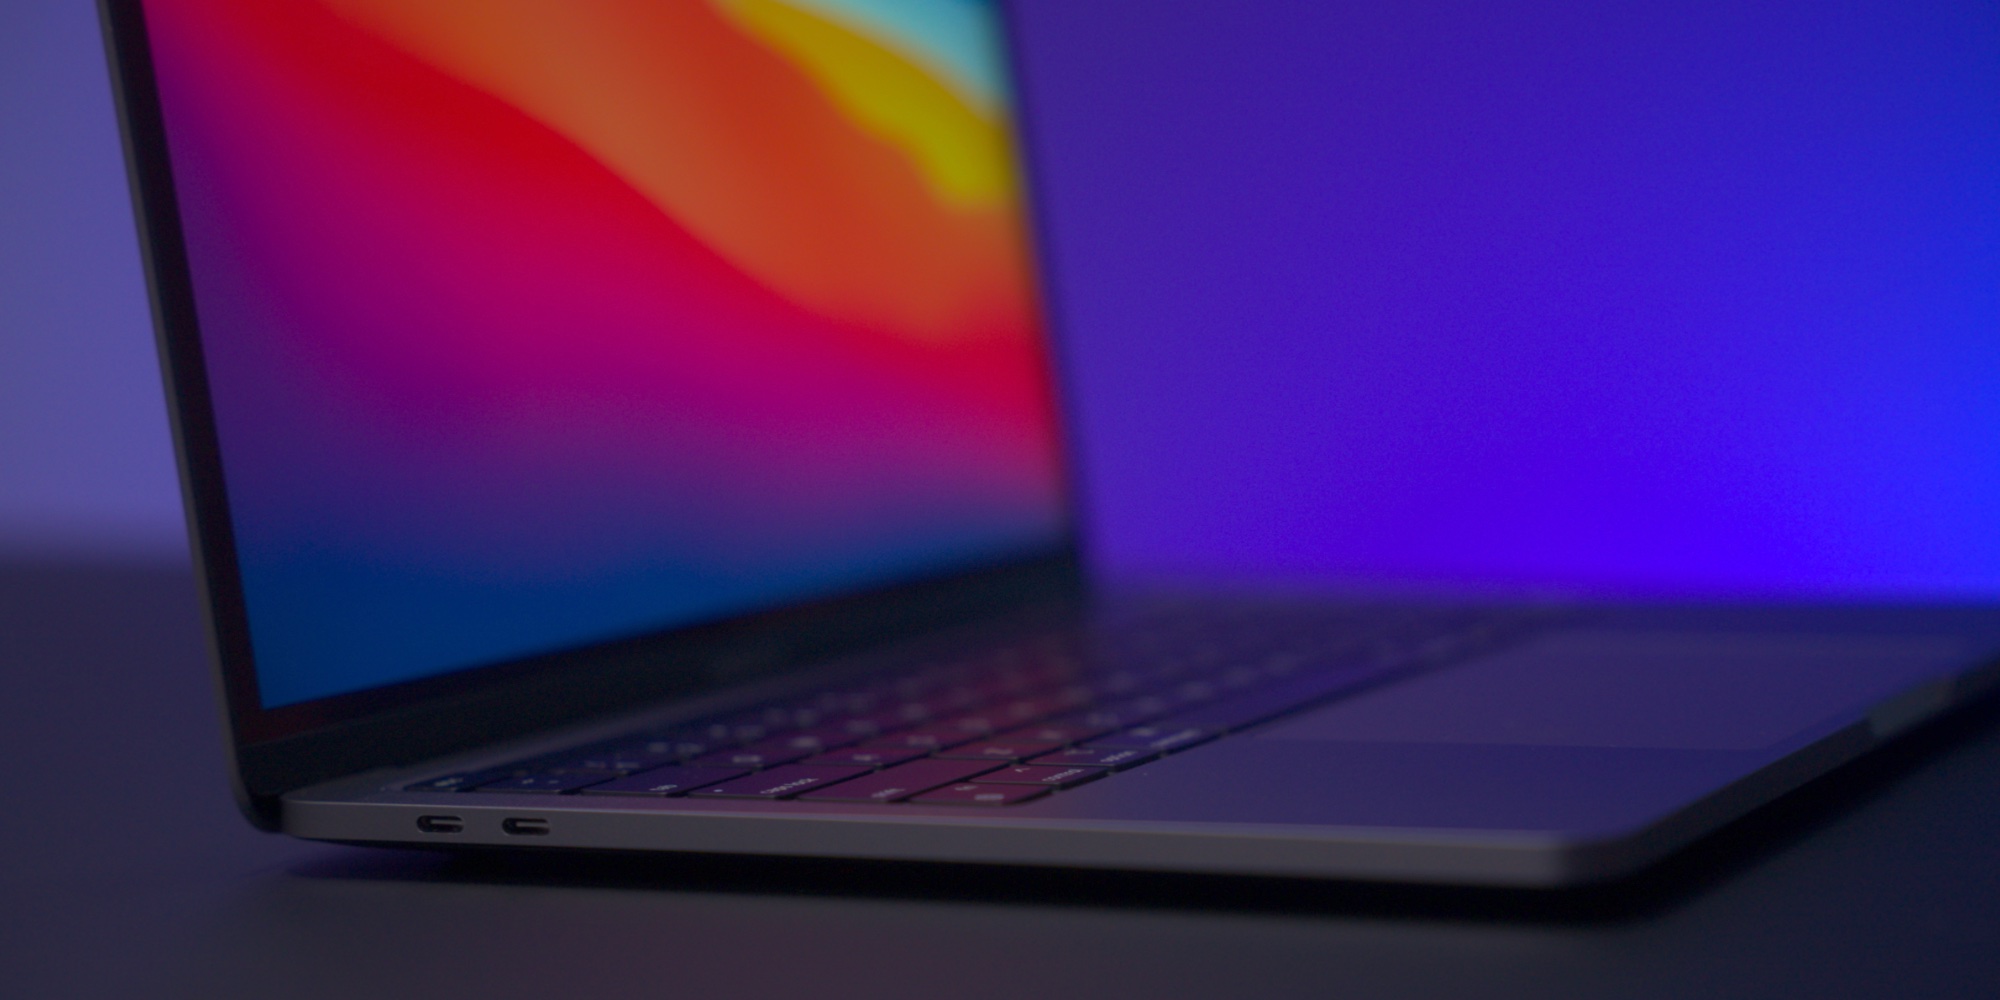 Woot takes $449 off Apple's latest M1 MacBook Pro 512GB at 2022 